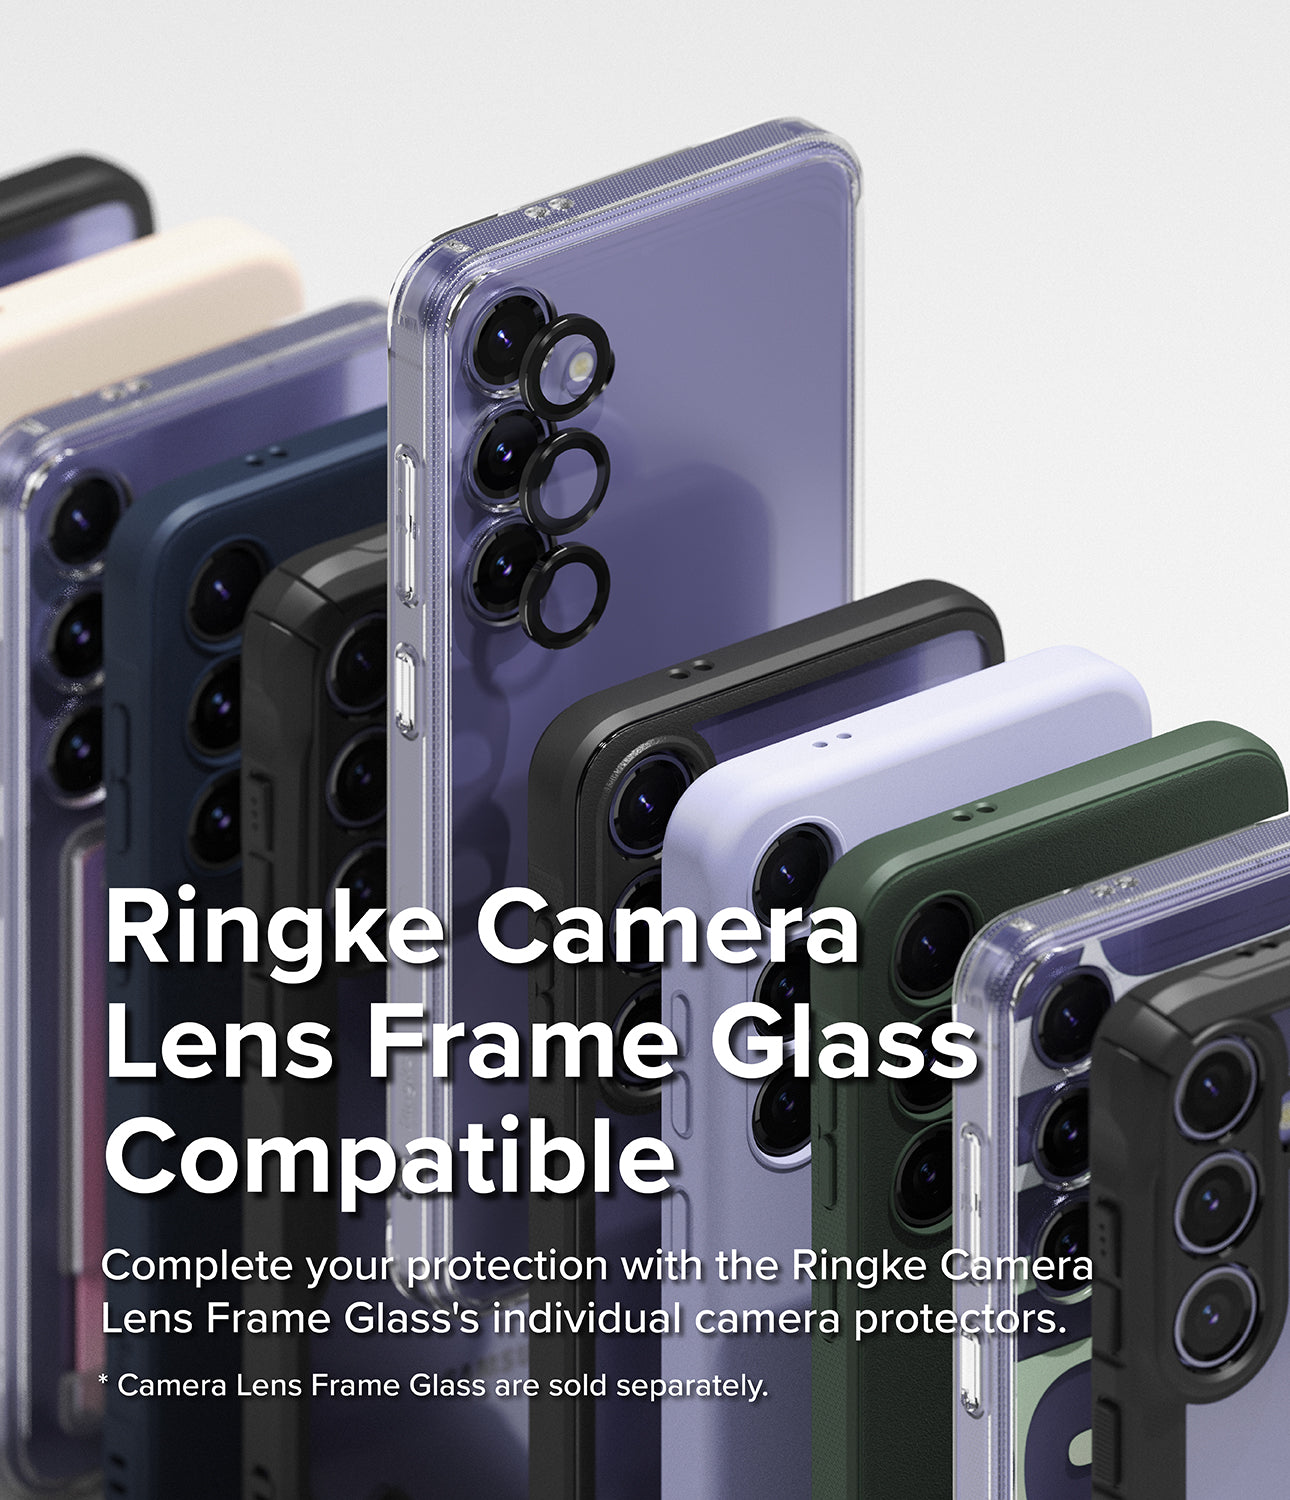 Galaxy S24 Plus Case | Onyx - Dark Green - Ringke Camera Lens Frame Glass Compatible. Complete your protection with the Ringke Camera Lens Frame Glass' individual camera protectors.